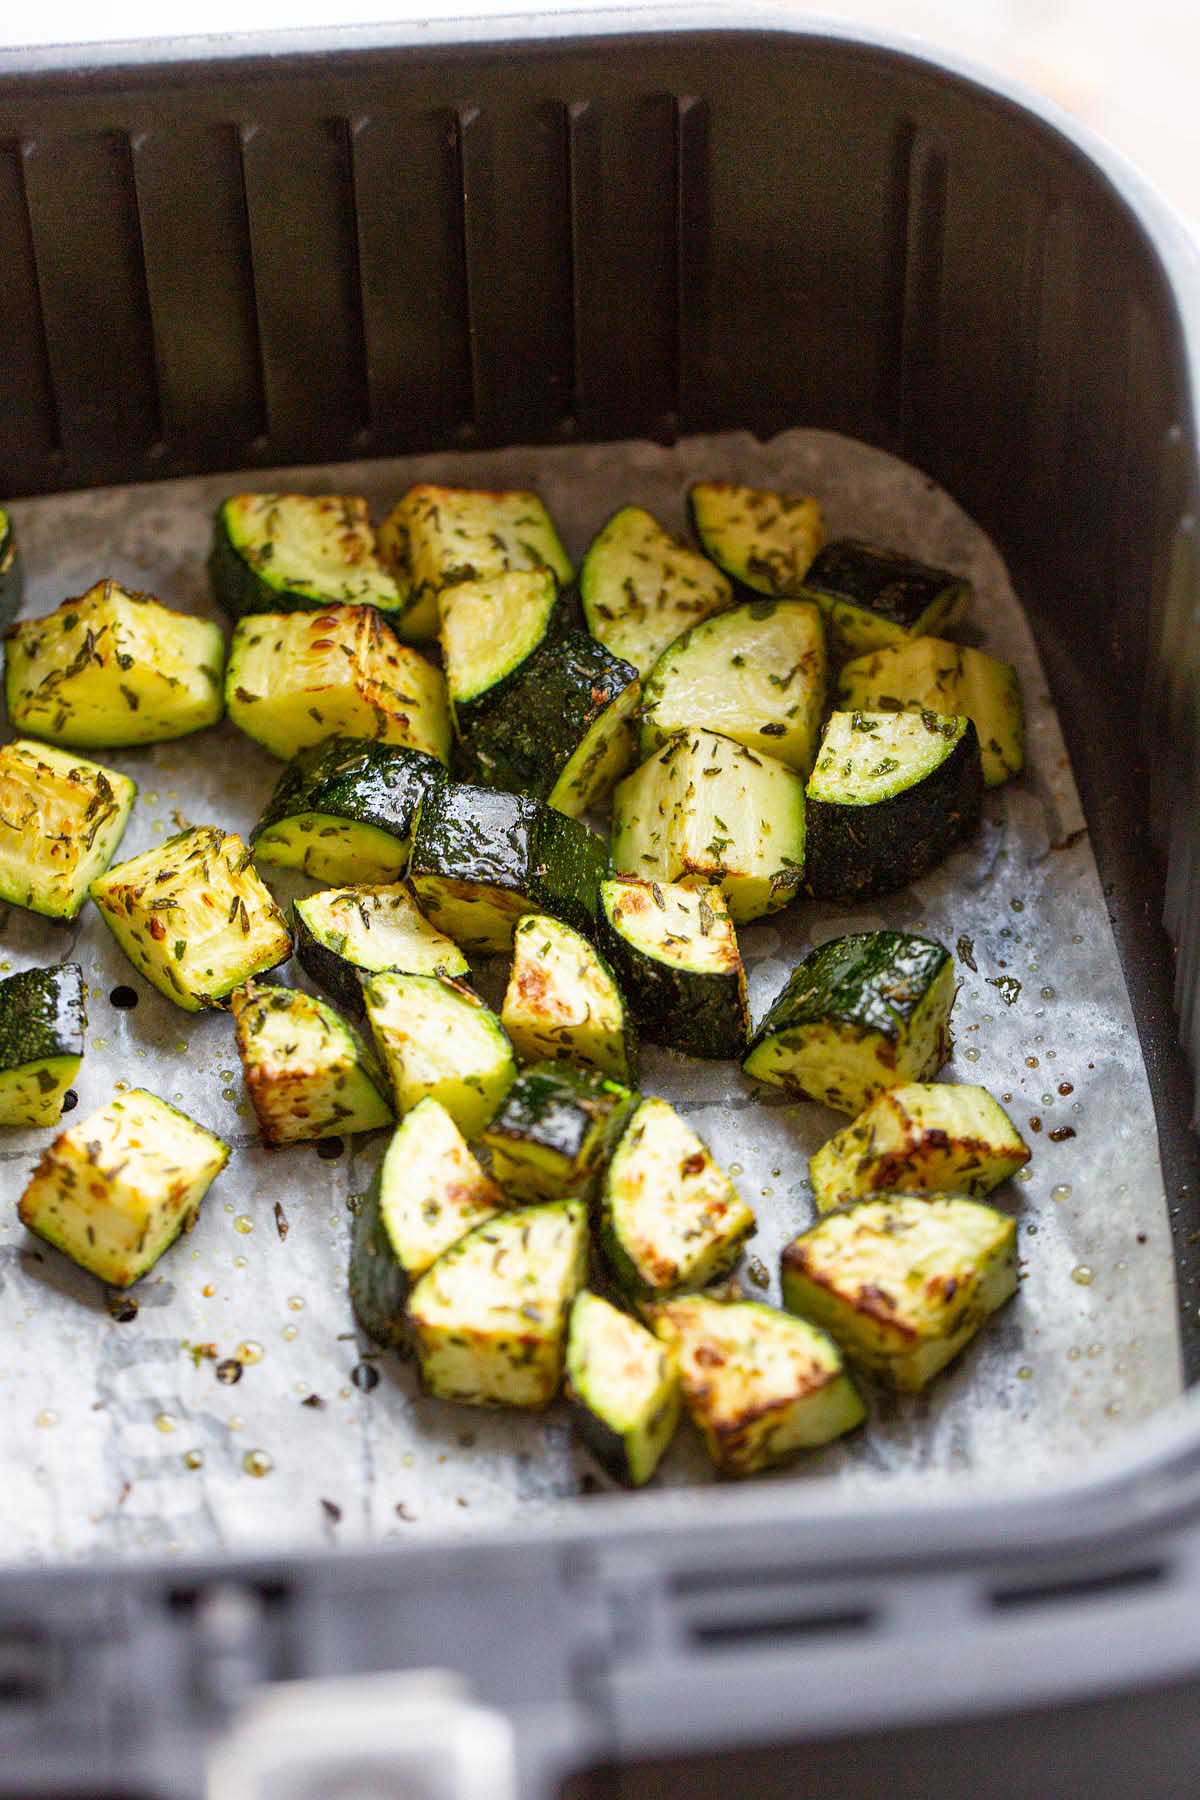 Cooked zucchini in an air fryer basket.